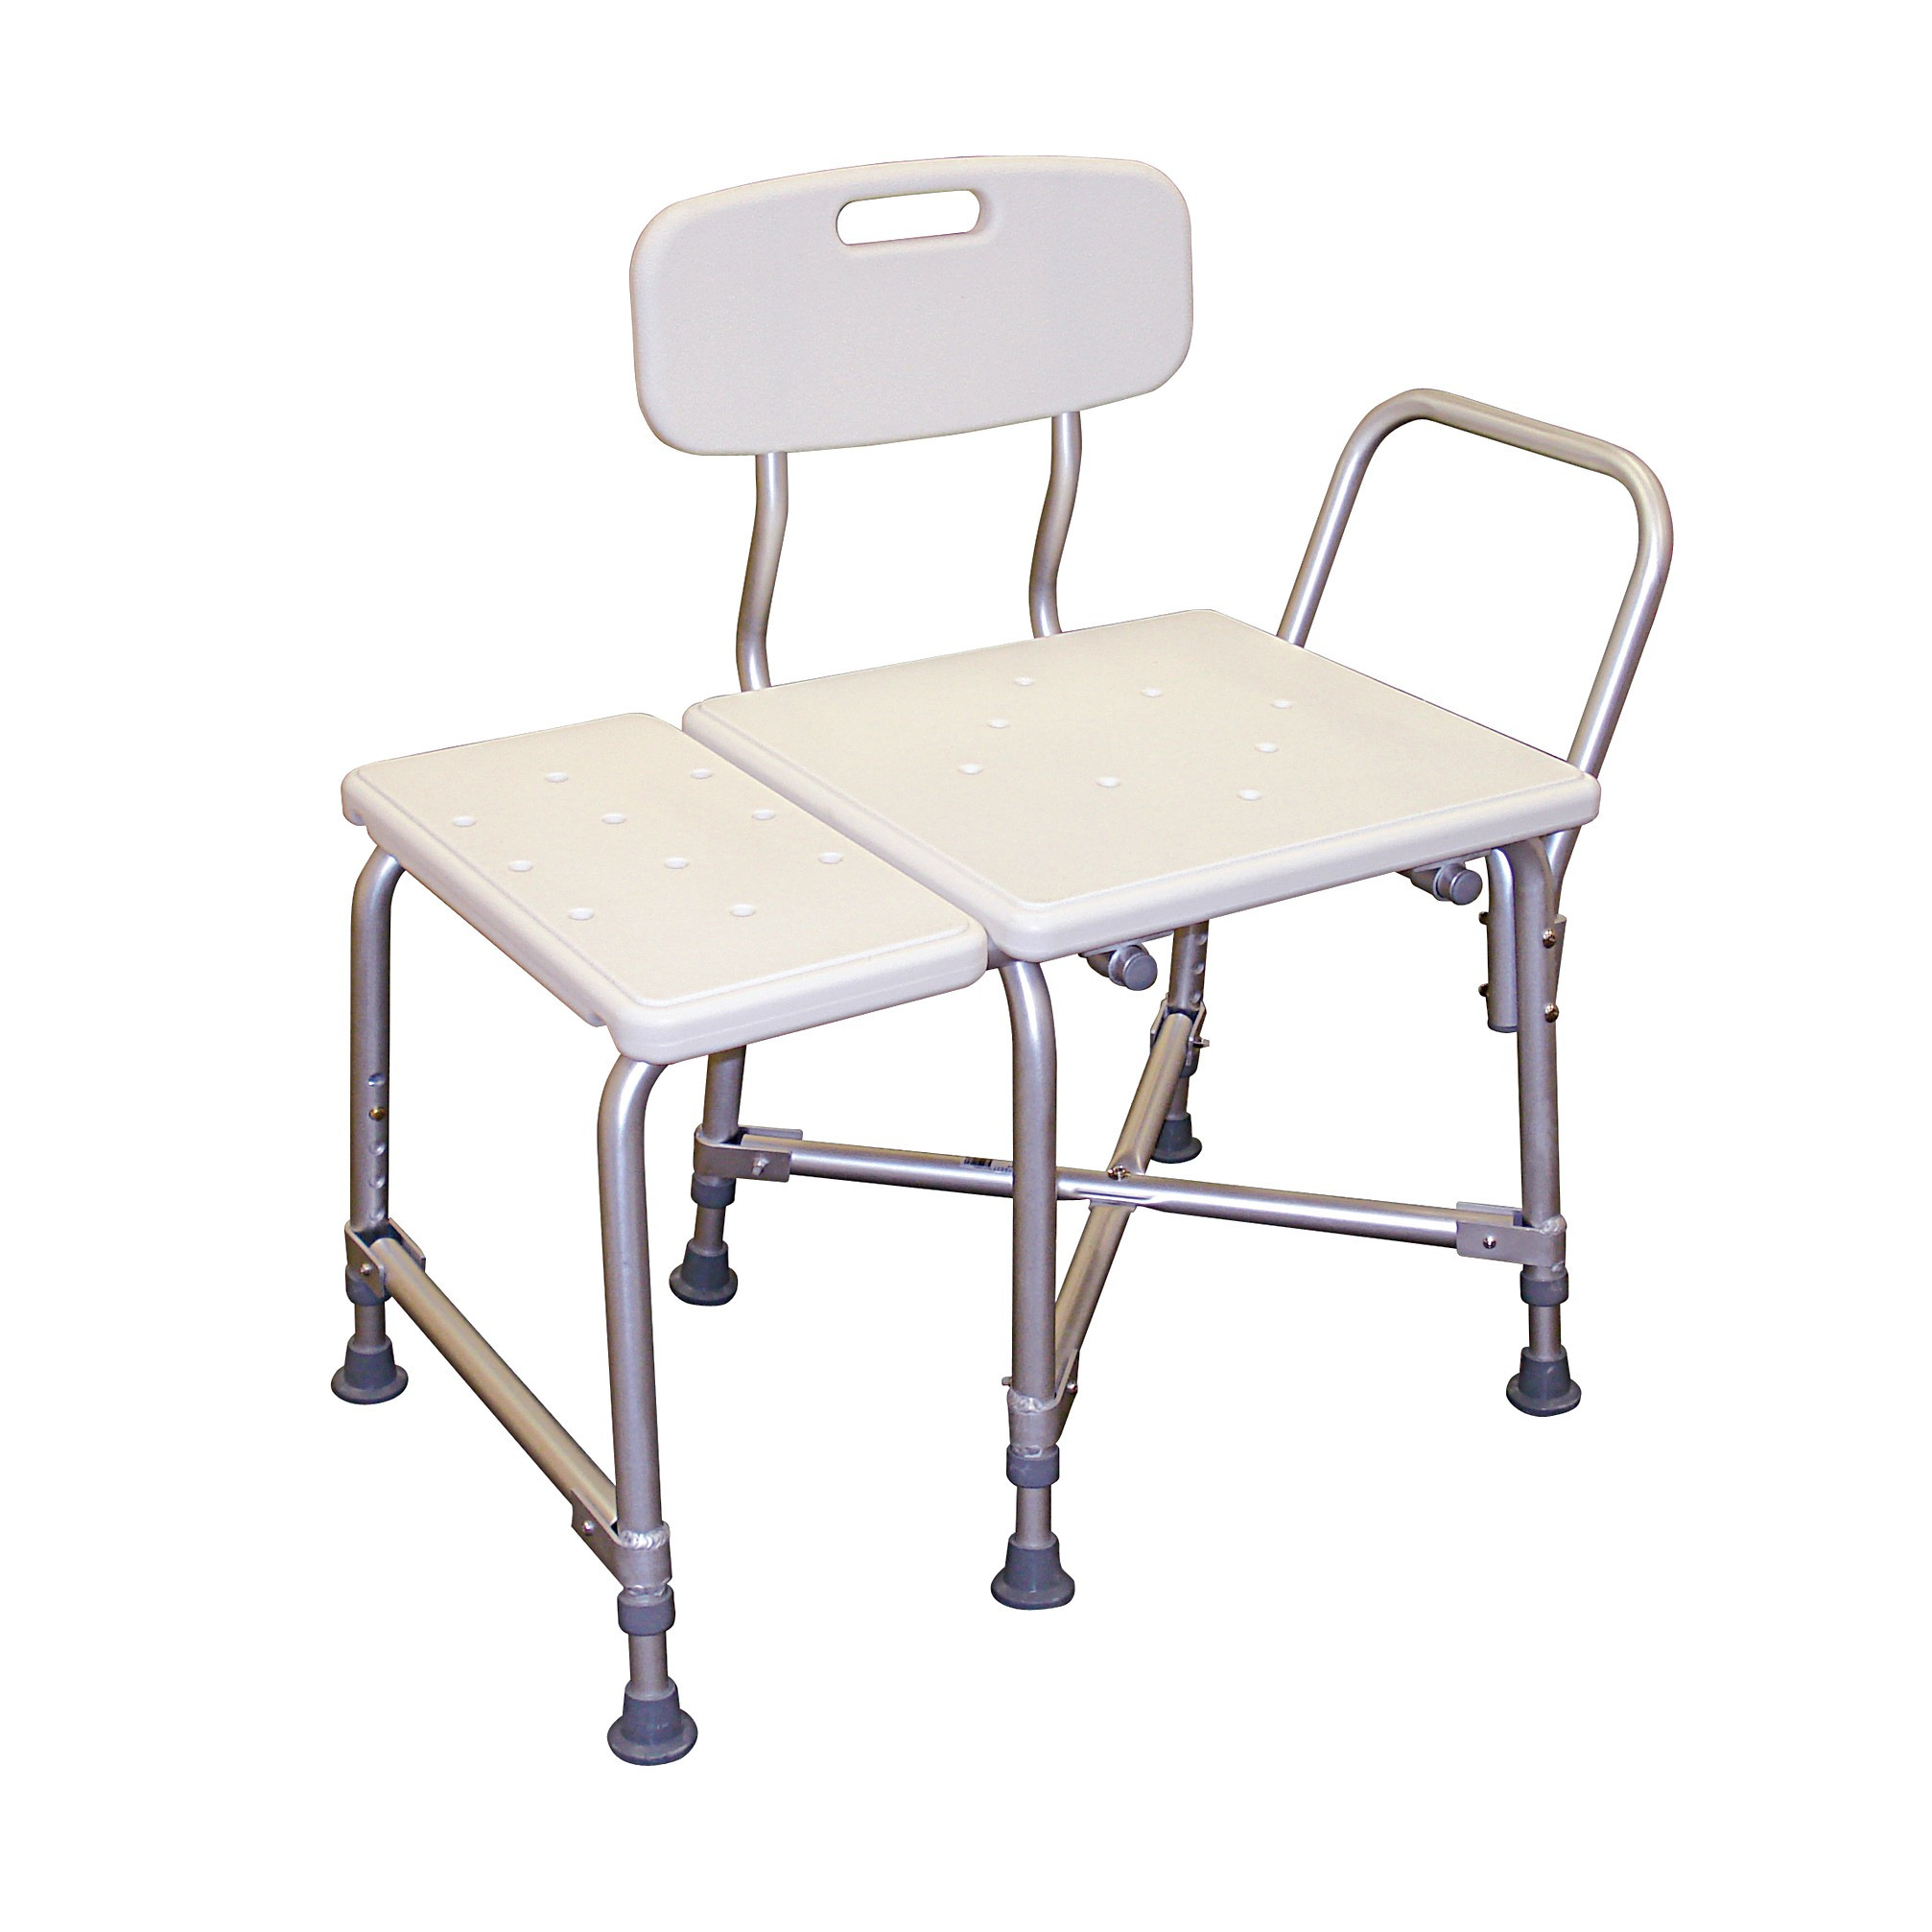 Deluxe Bariatric Transfer Bench With Cross-Frame Brace